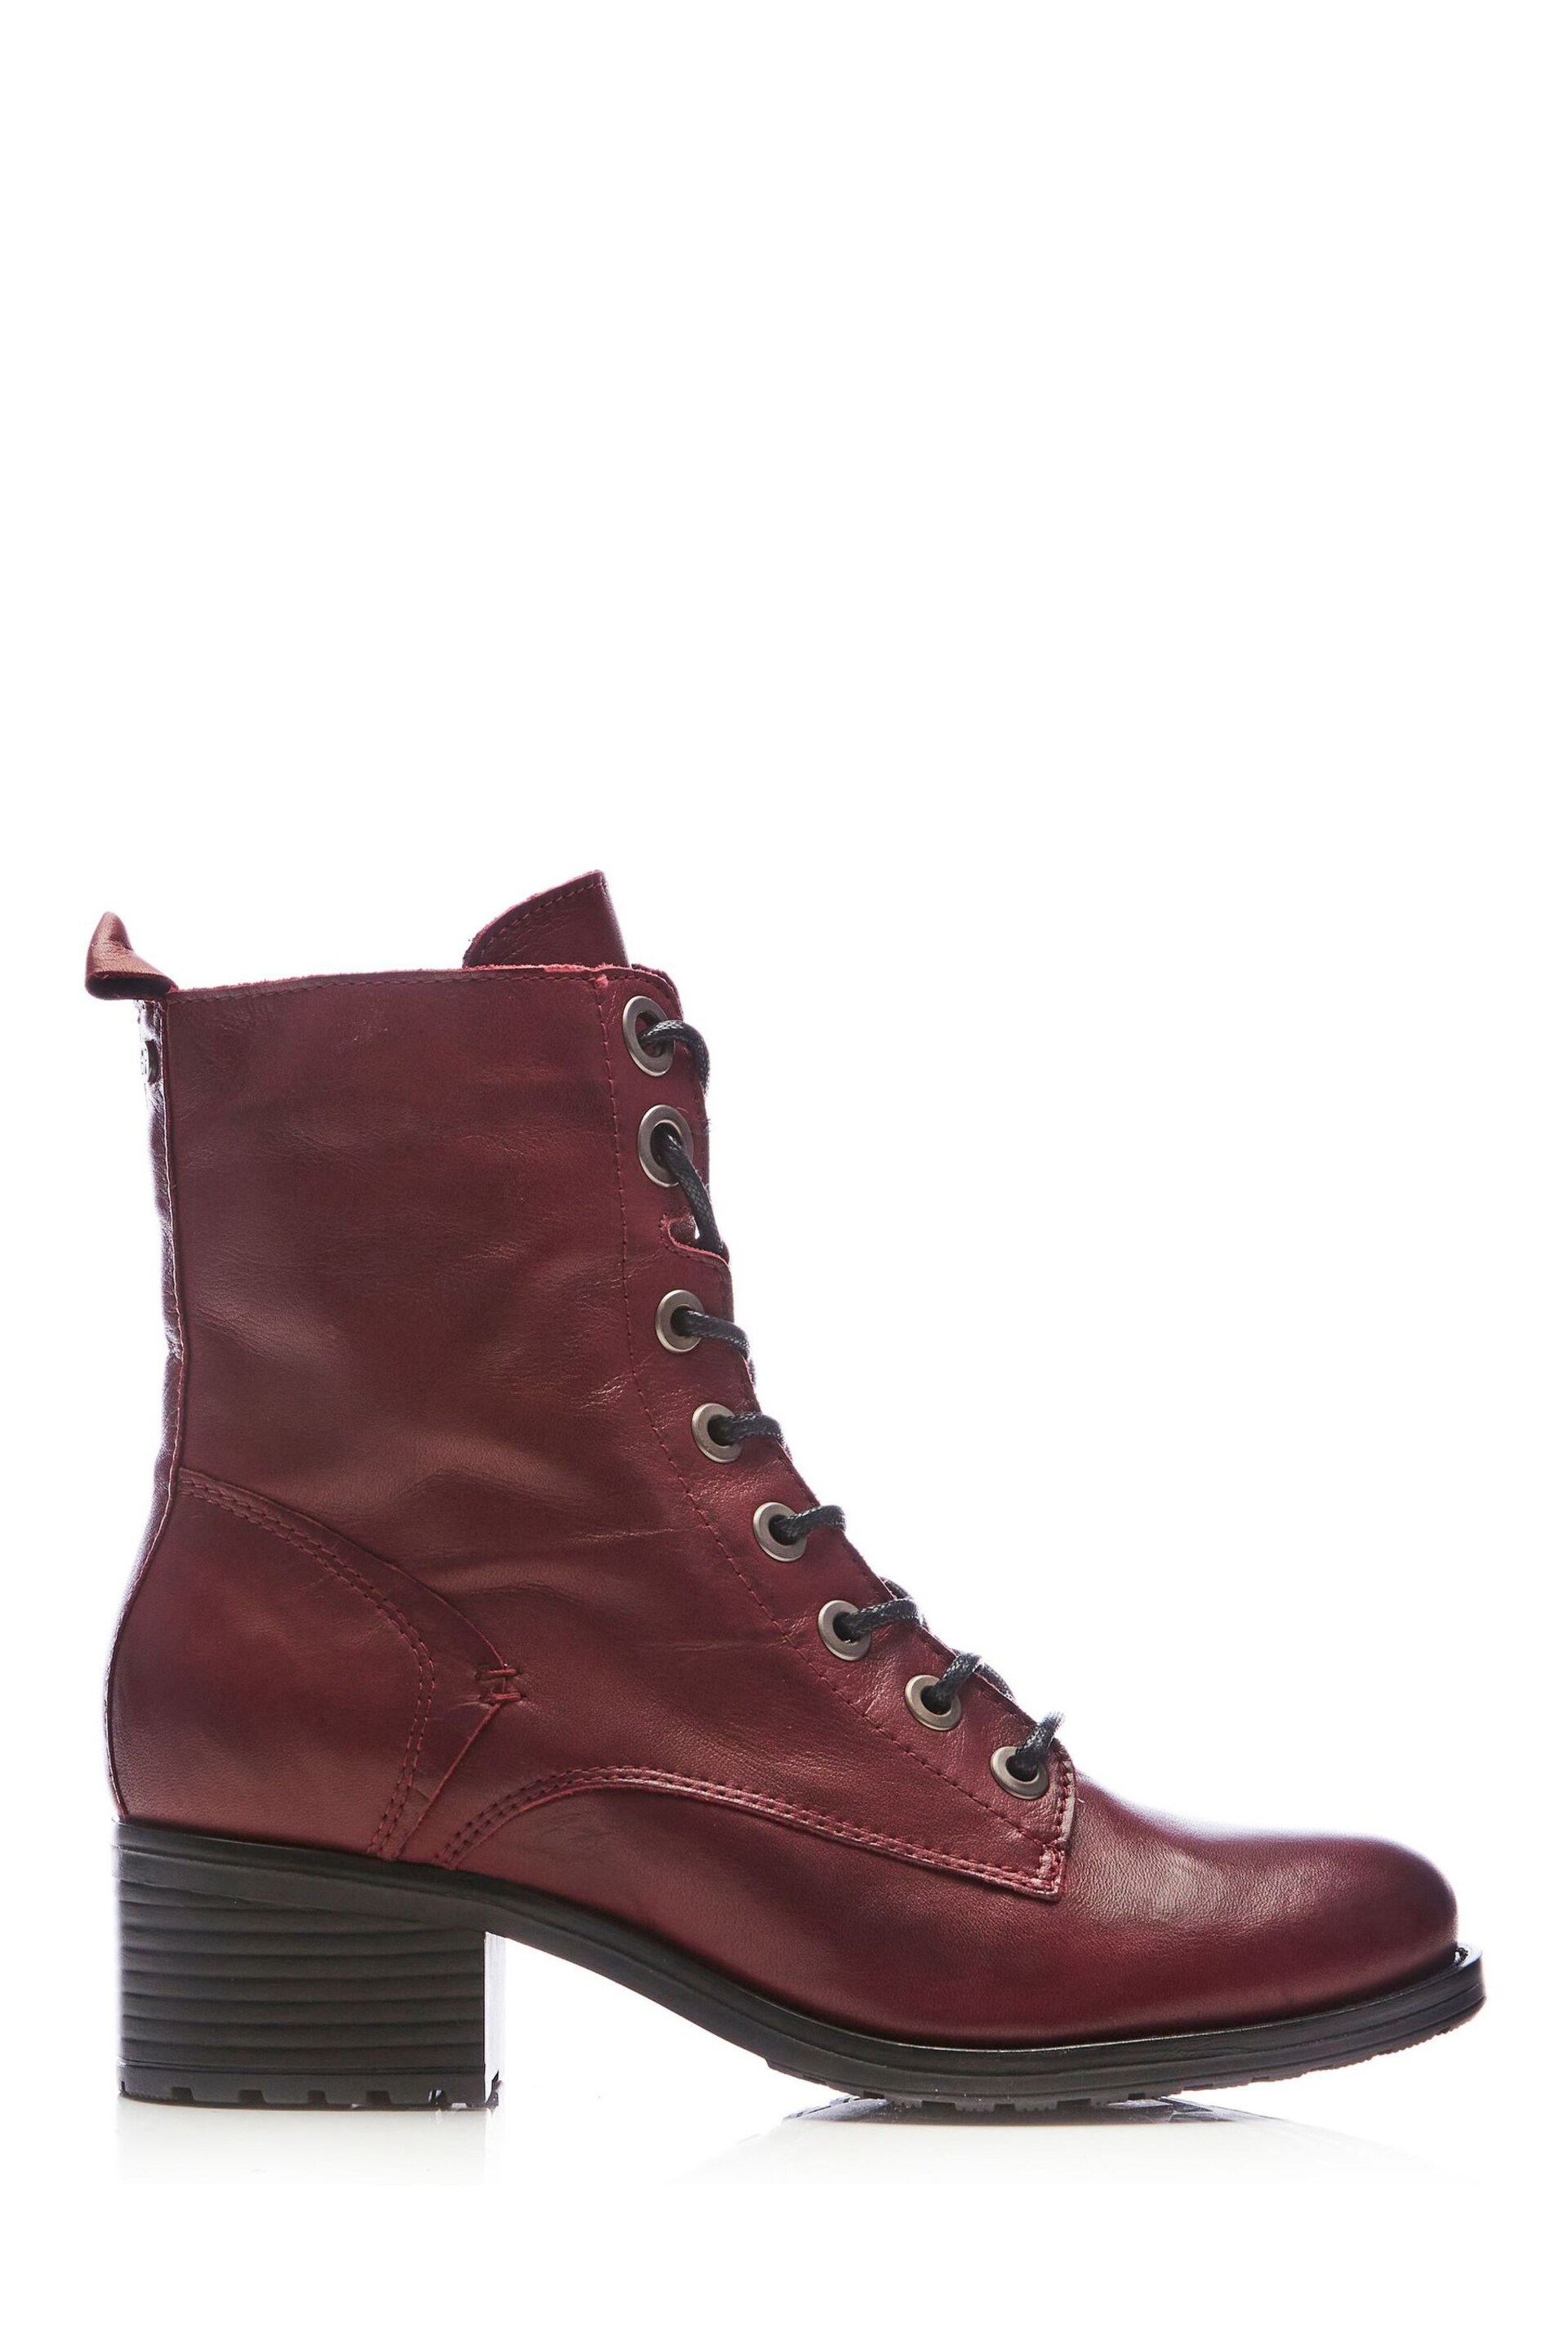 Moda In Pelle Bezzie Lace Up Leather Ankle Boots - Image 1 of 4